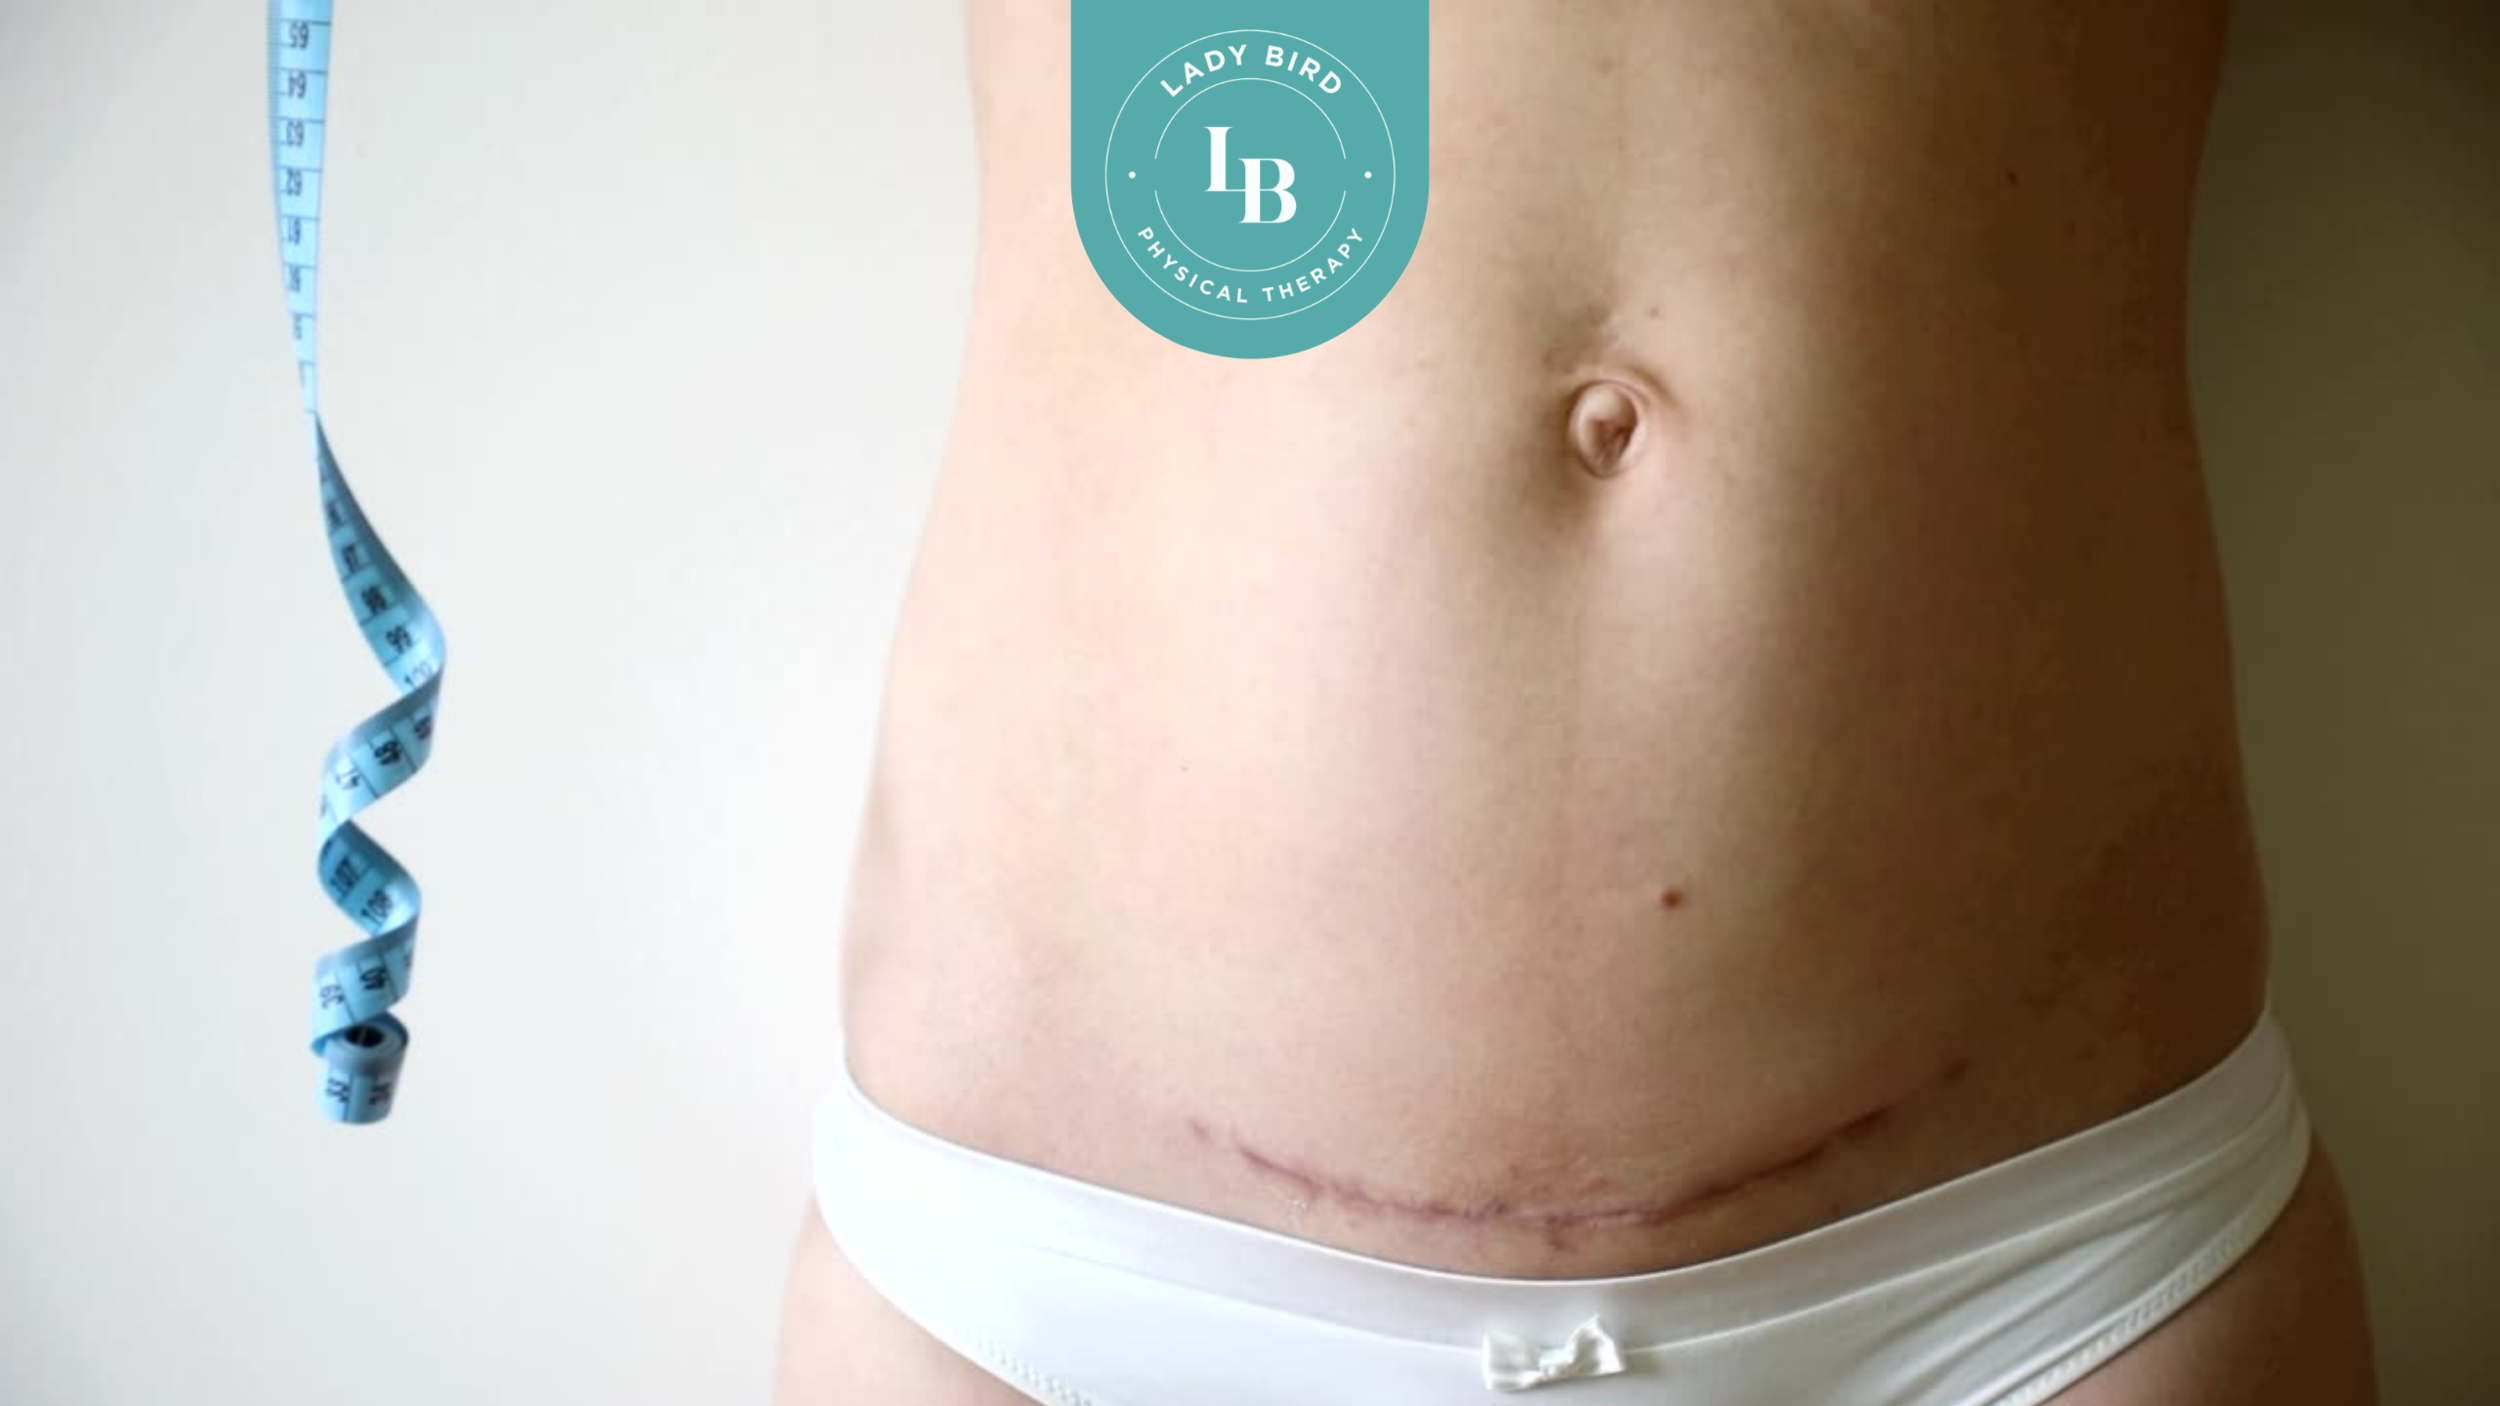 How Do I Take Care of a C-Section Scar?